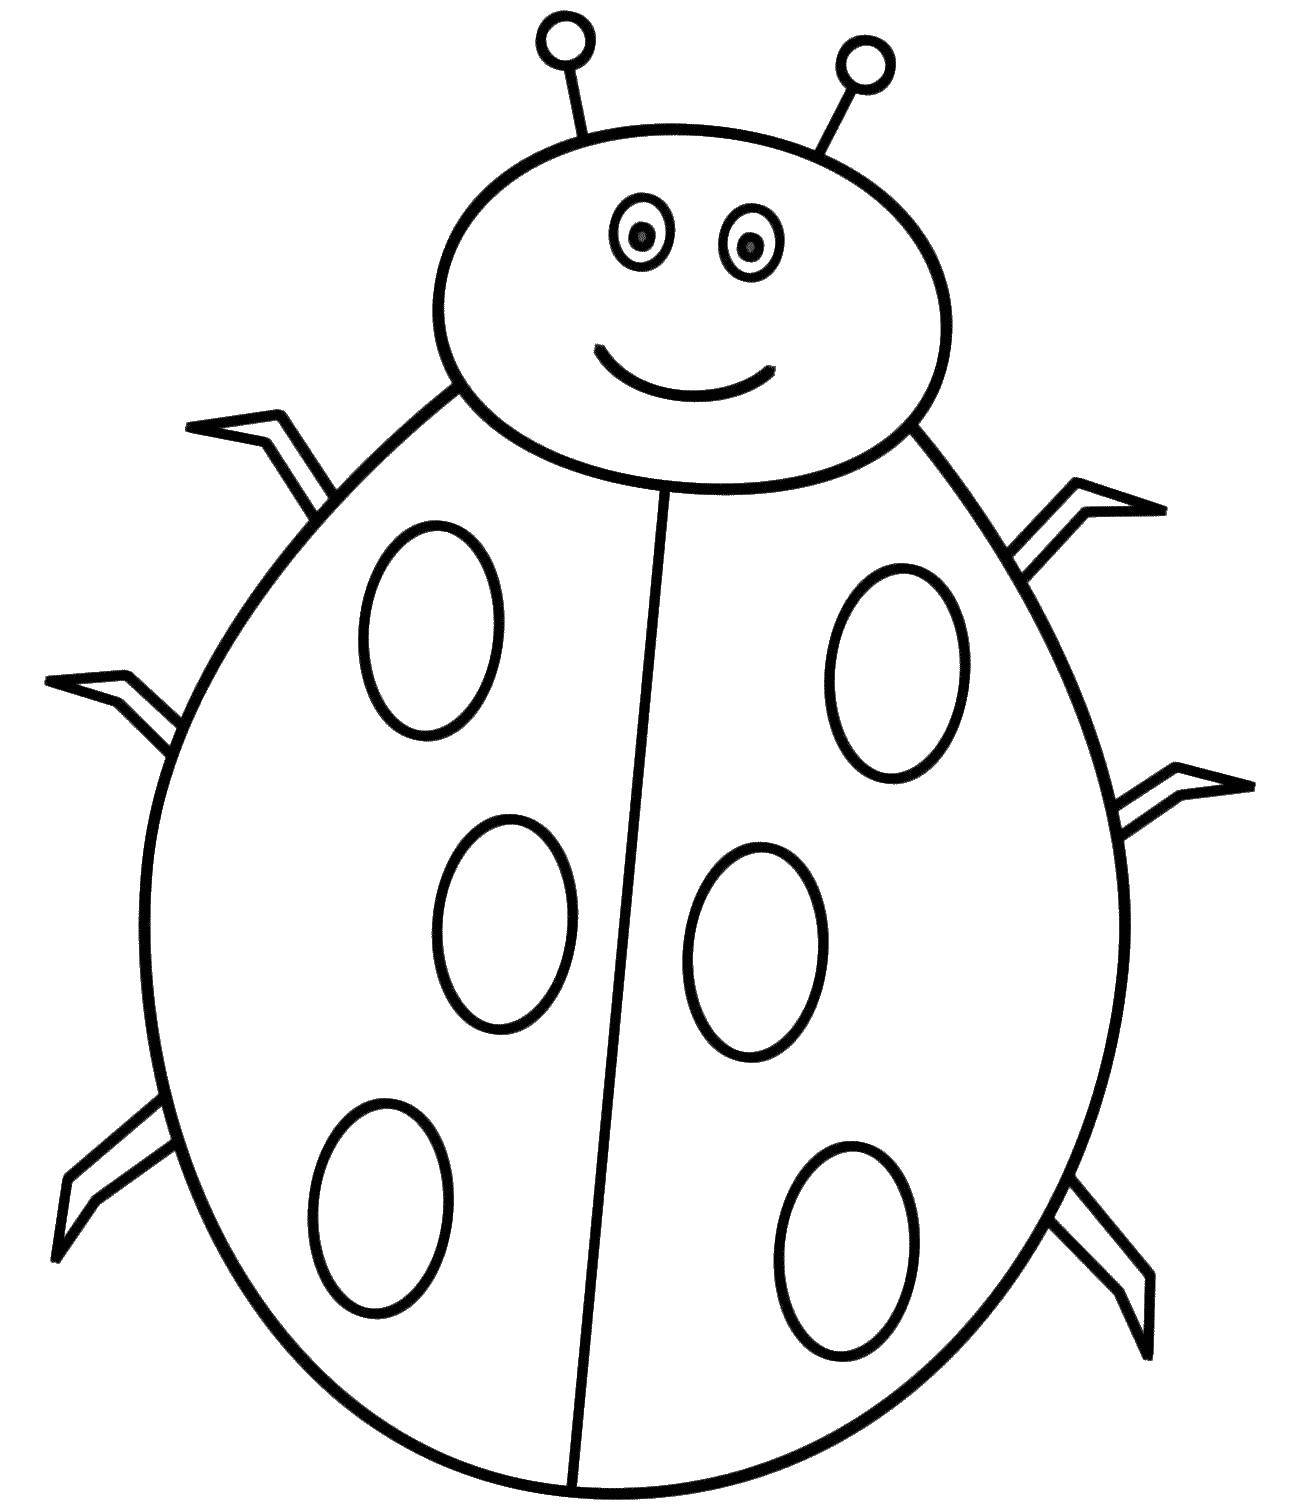 Coloring Ladybug. Category Coloring pages for kids. Tags:  ladybug, bugs.